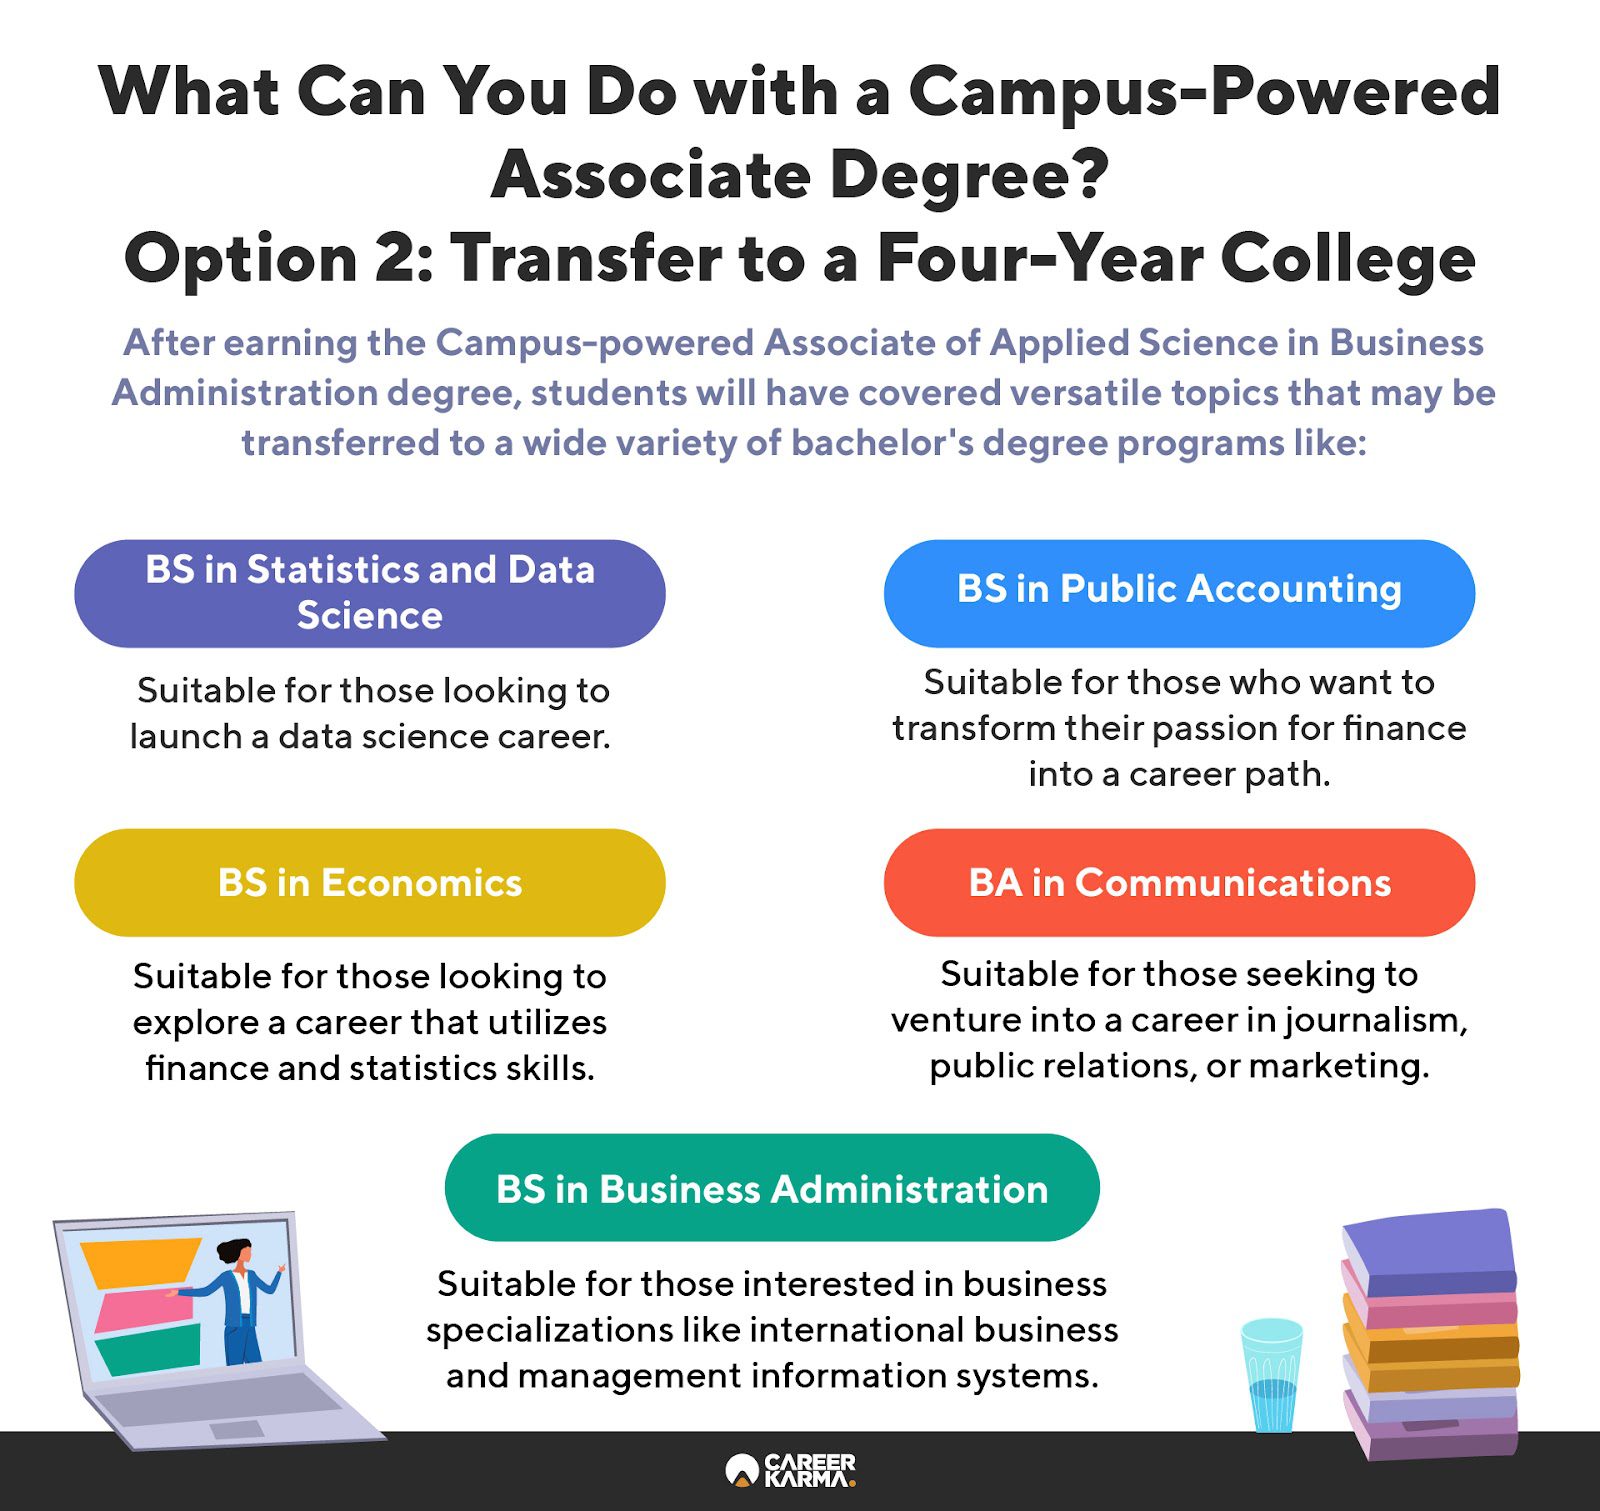 An infographic highlighting the bachelor’s degrees you can pursue after Campus